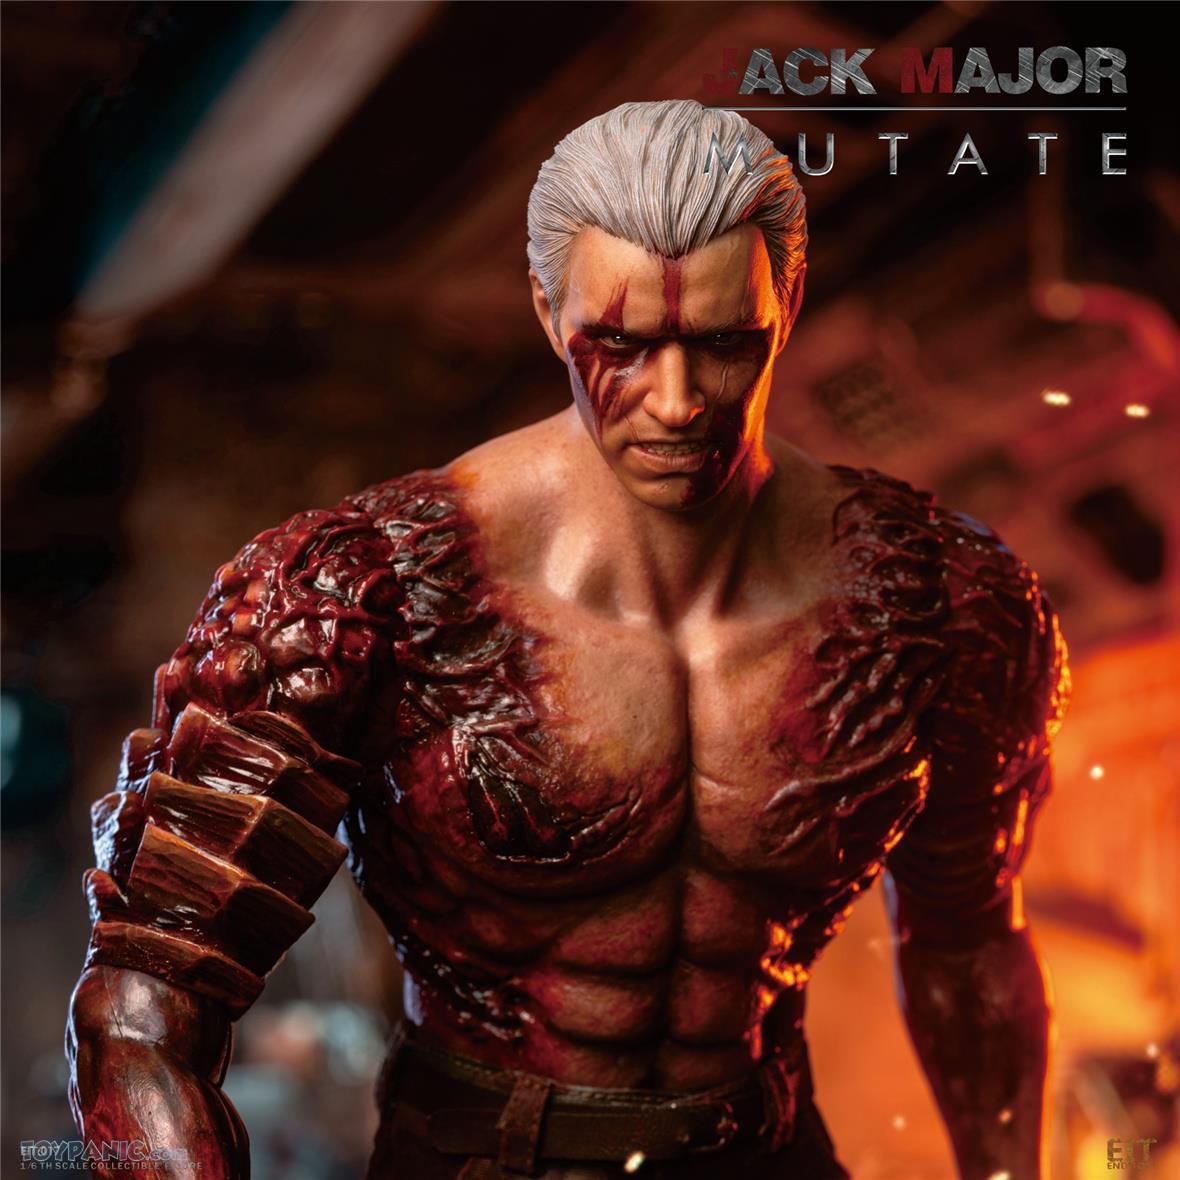 enditoys - NEW PRODUCT:  1/6 Jack Major Mutate from End I Toys  2732024105954AM_1069441